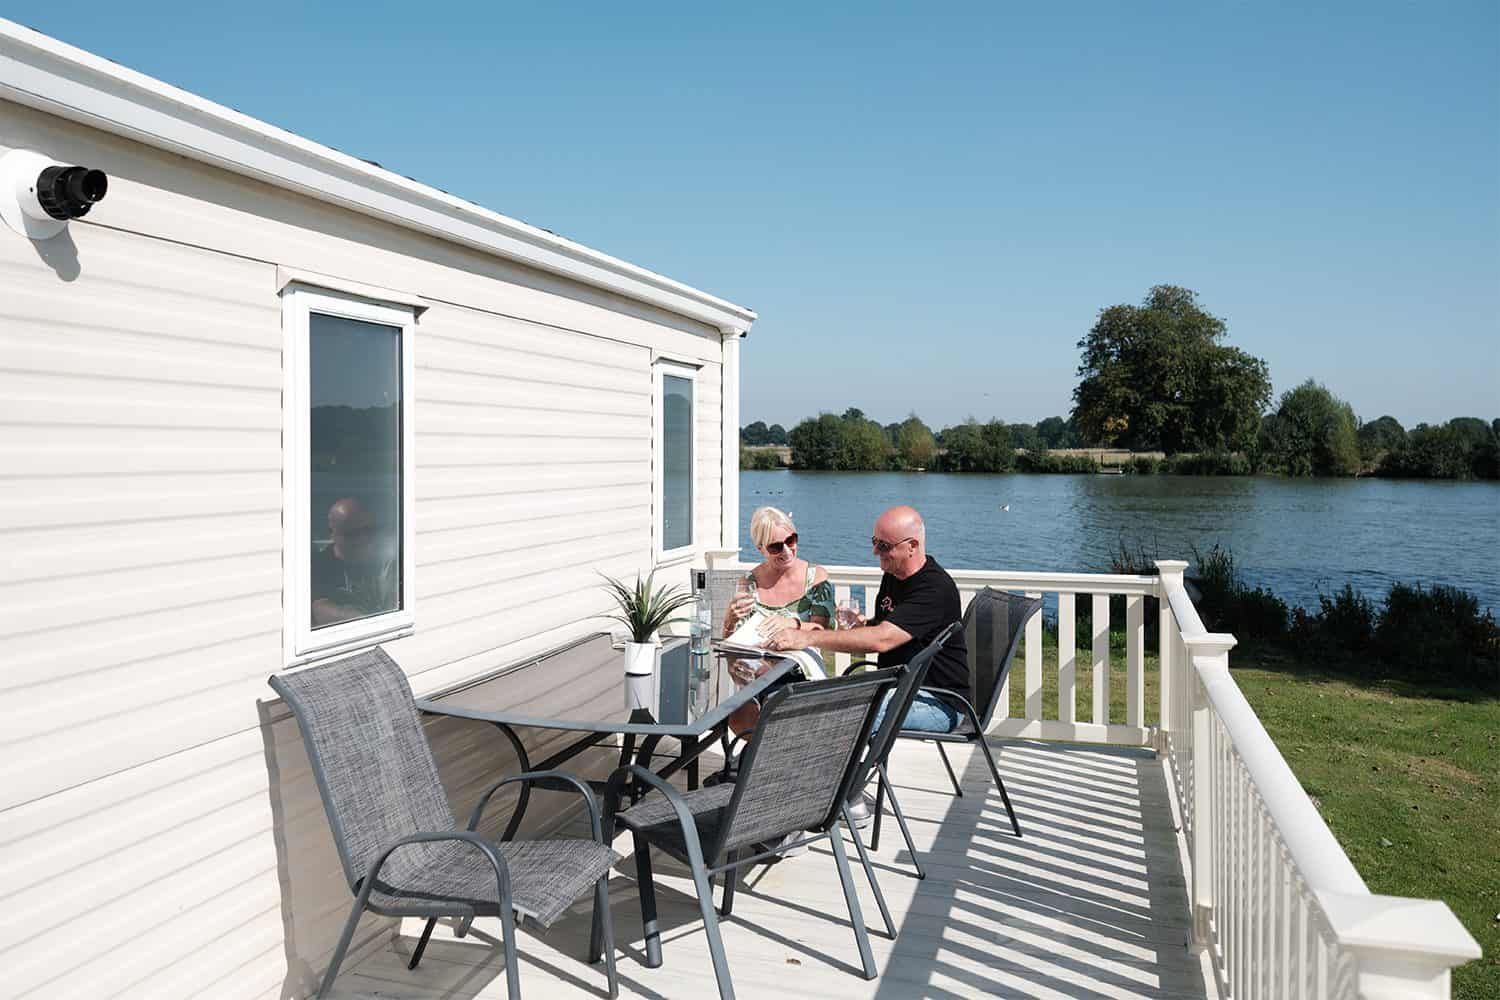 A couple sat on the decking outside their static caravan